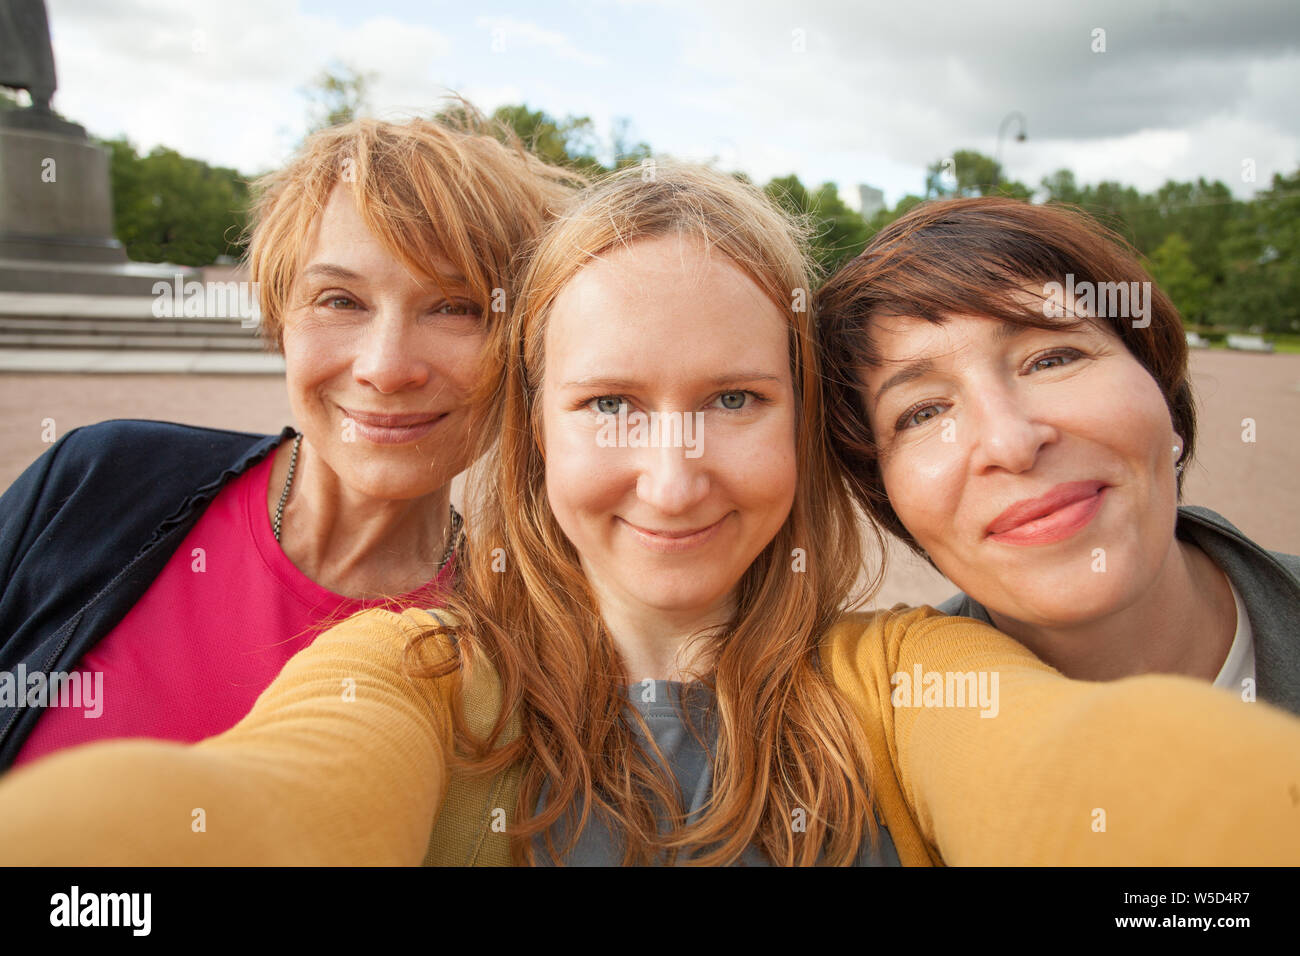 Three diverse happy women friends making selfie photo and having fun outdoors Stock Photo